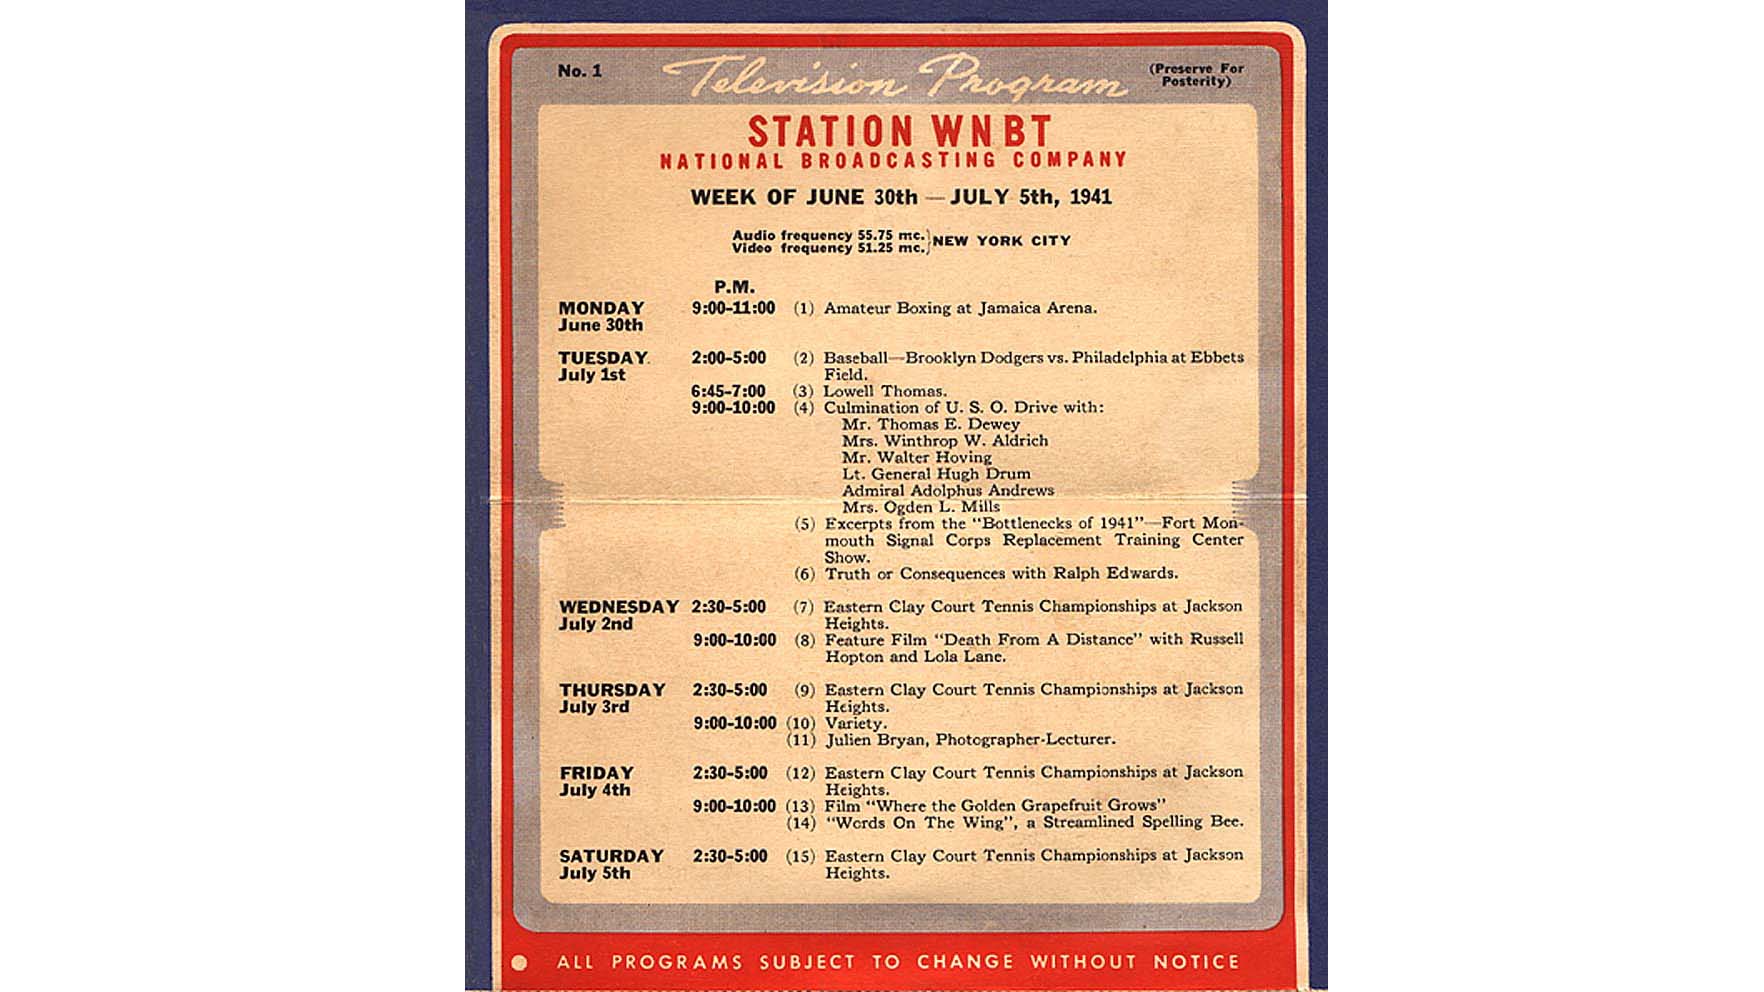 The first commercial television station's schedule on the day commercial television began, July 1st, 1941. From Wikipedia.